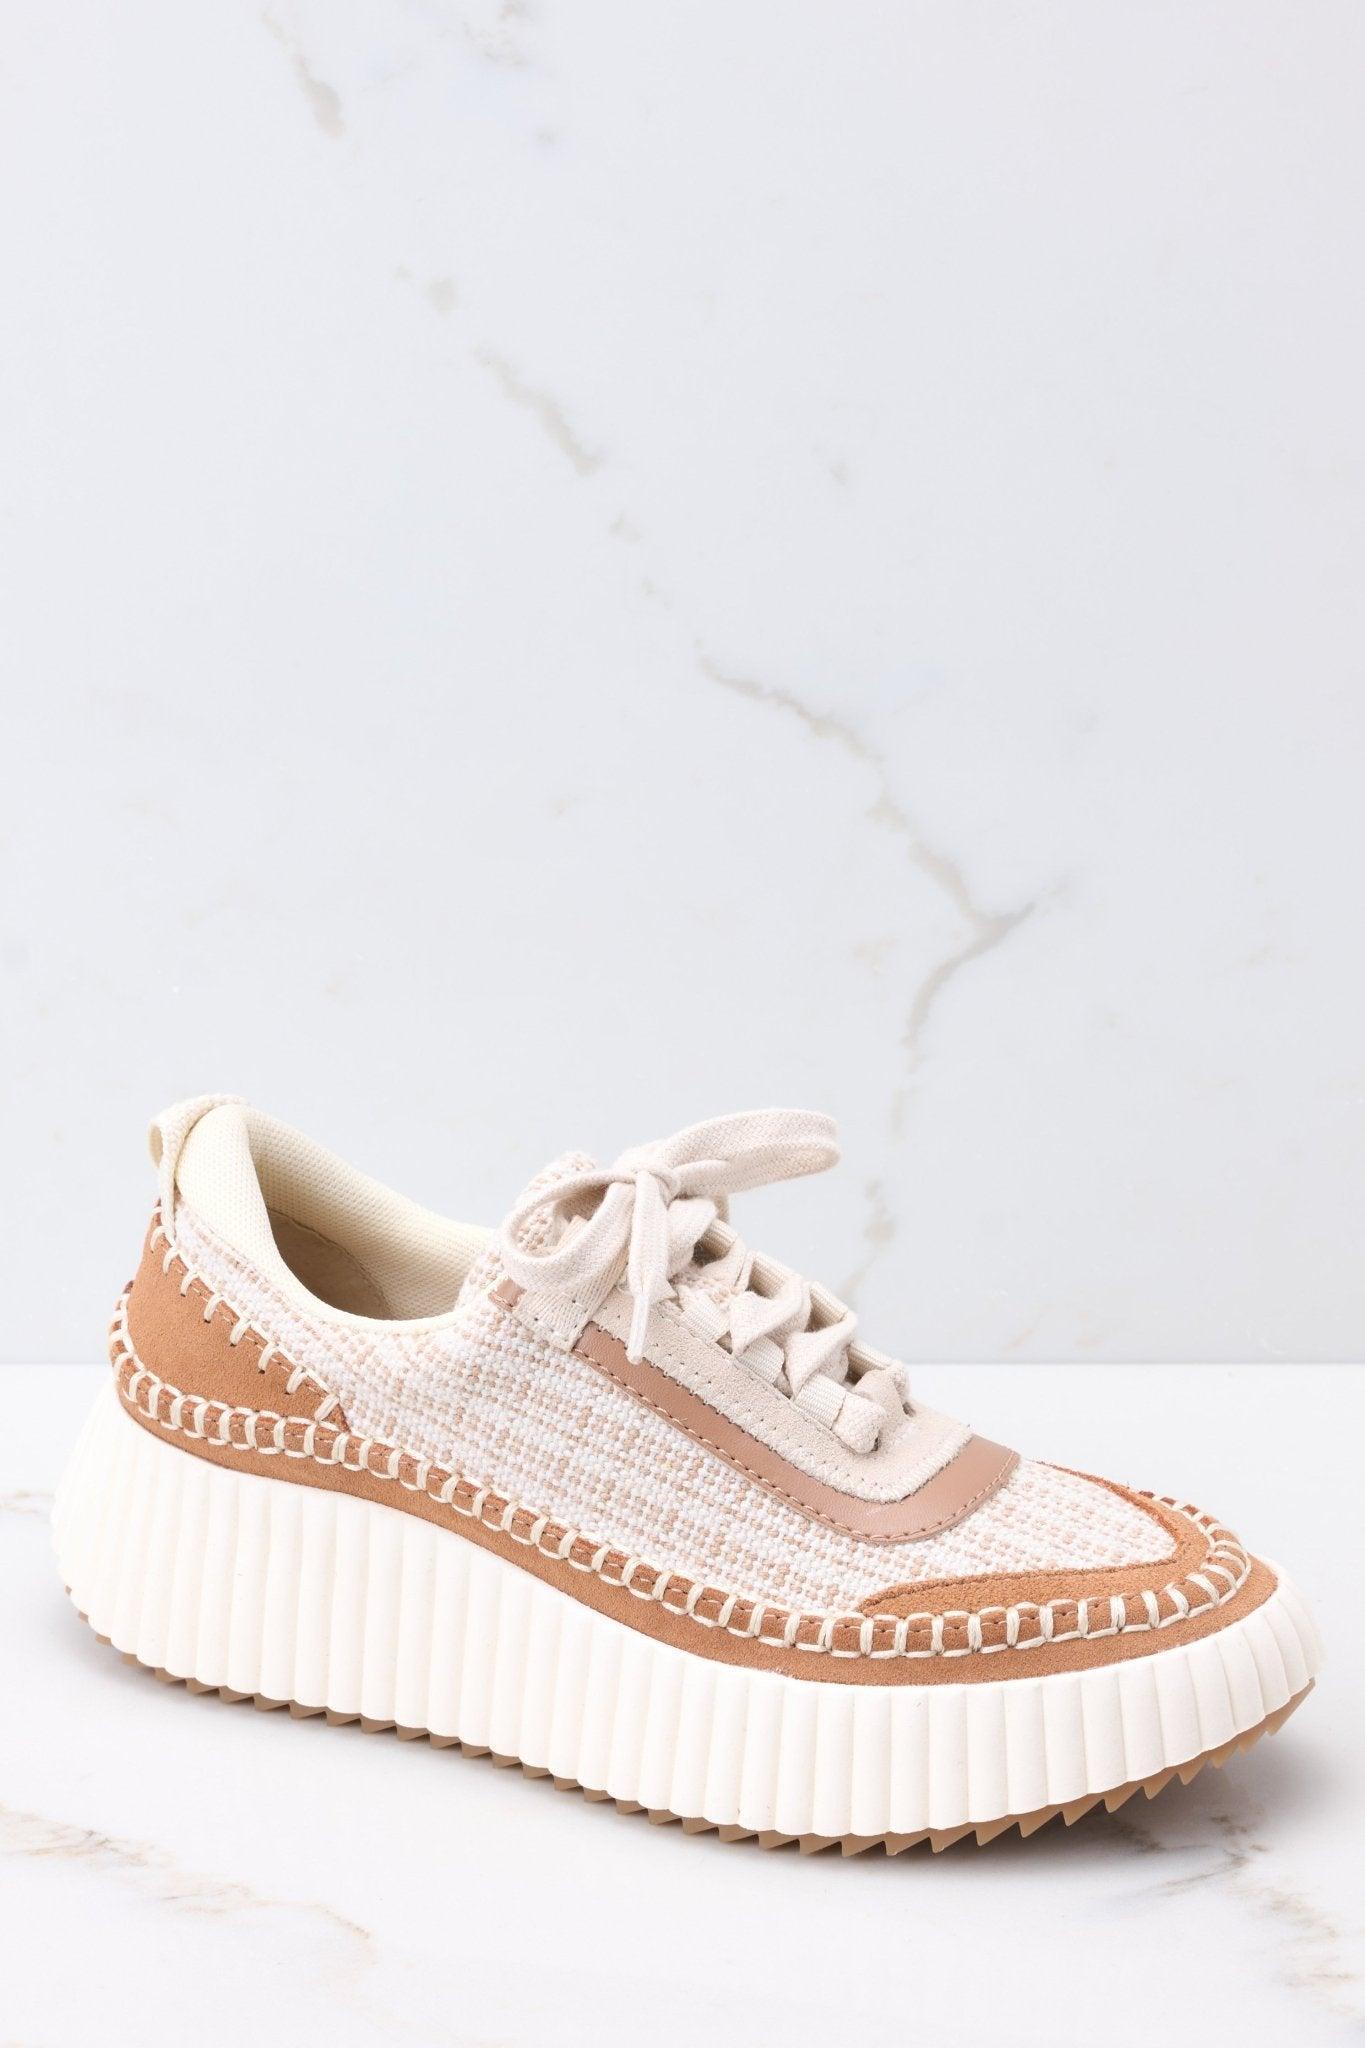 Dolce Vita Dolen Brown Multi Woven Sneakers Product Image